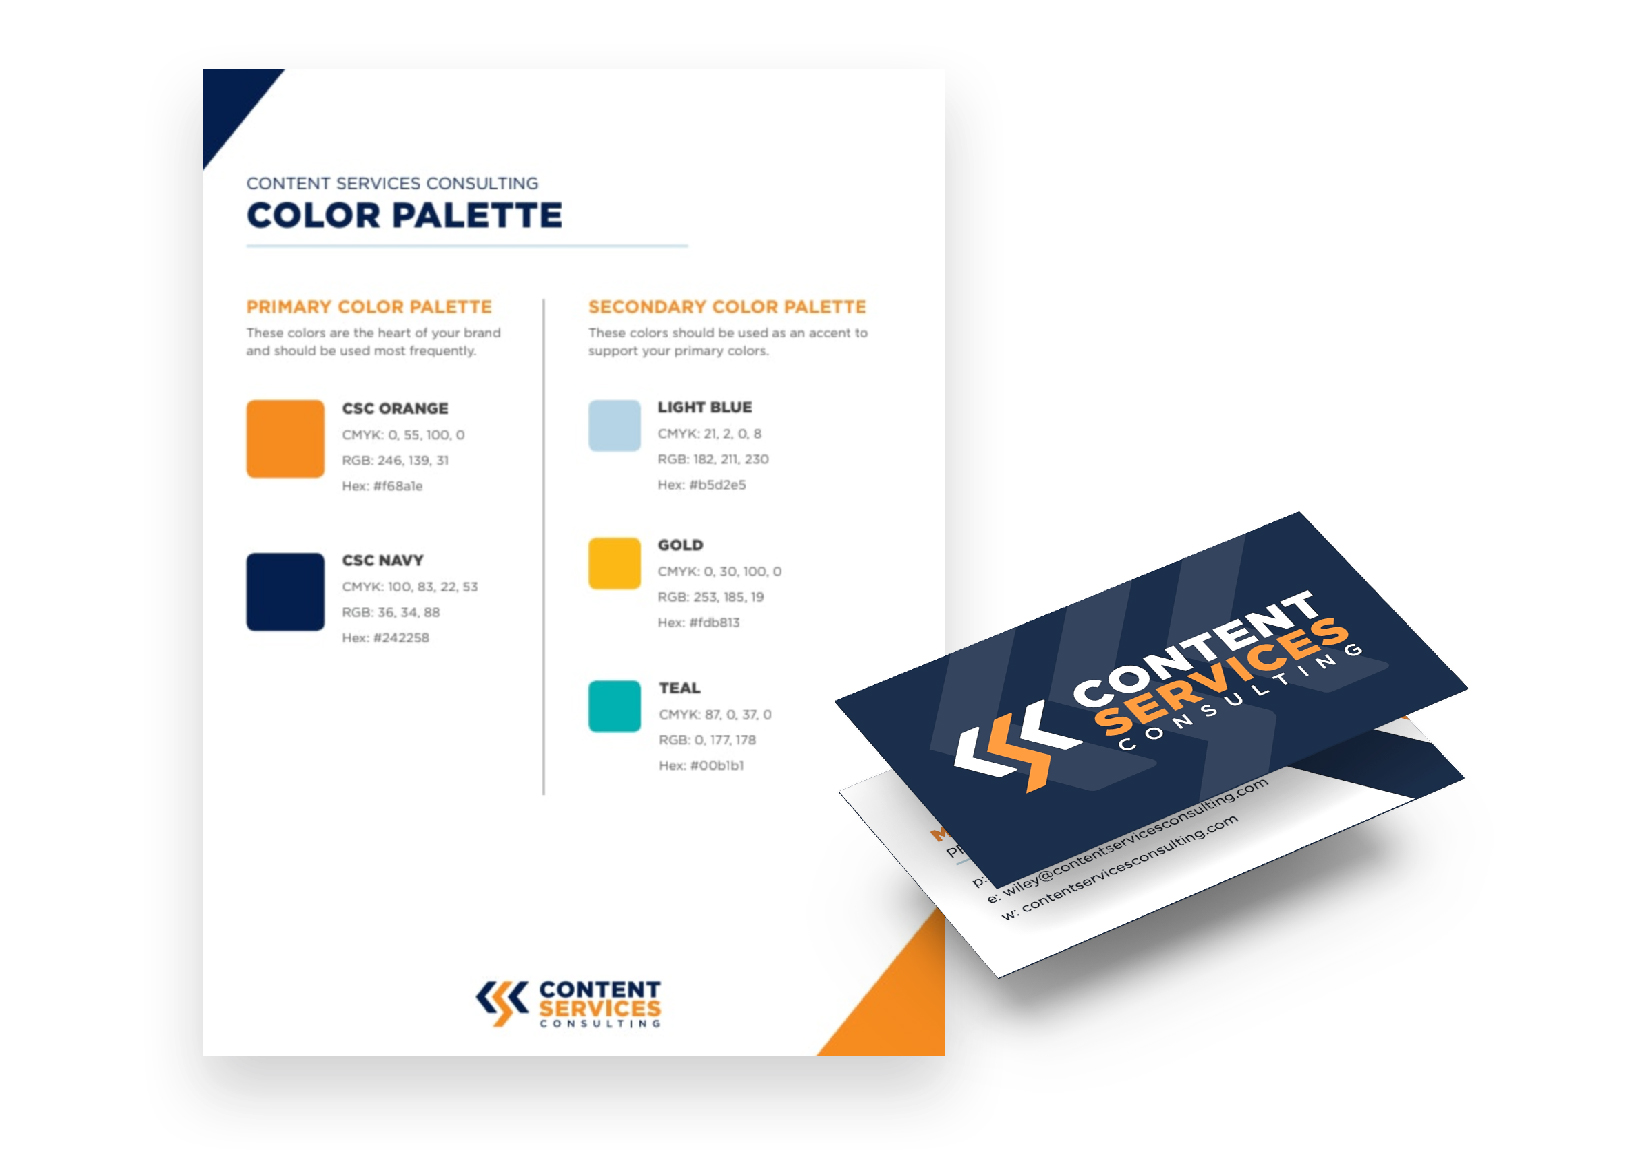 Content Services Consulting identity guidelines and business card mockup